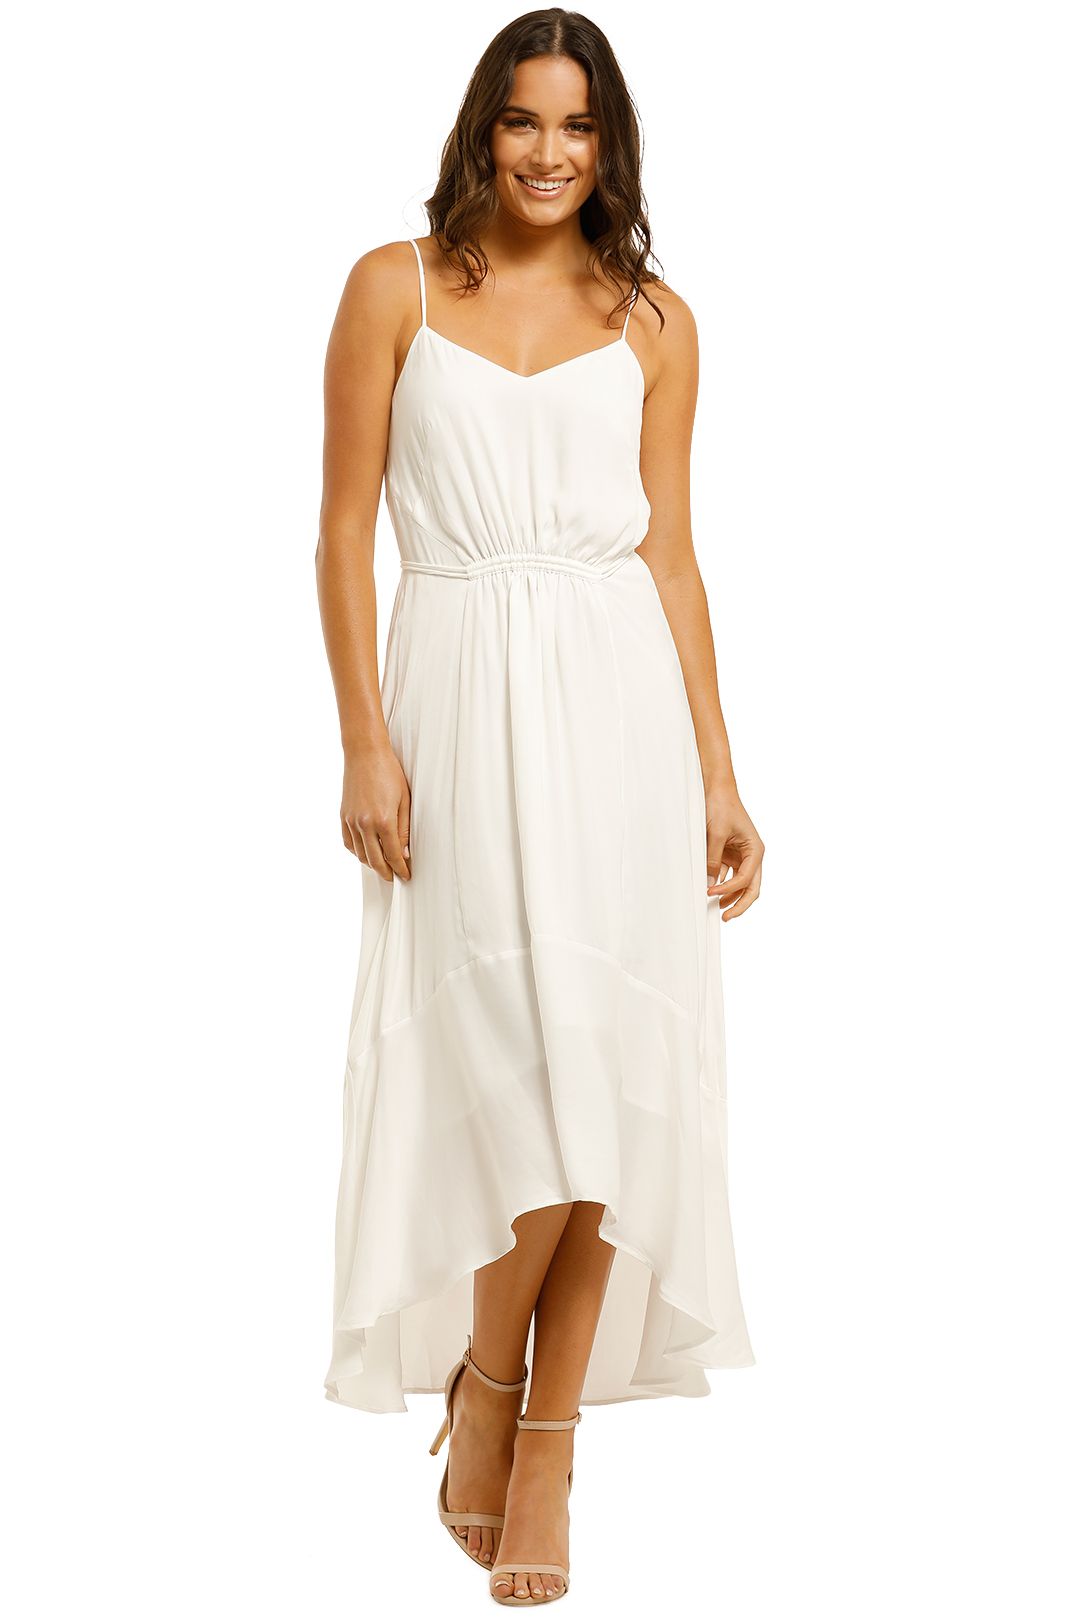 Grace-Willow-Bayou-Dress-White-Front